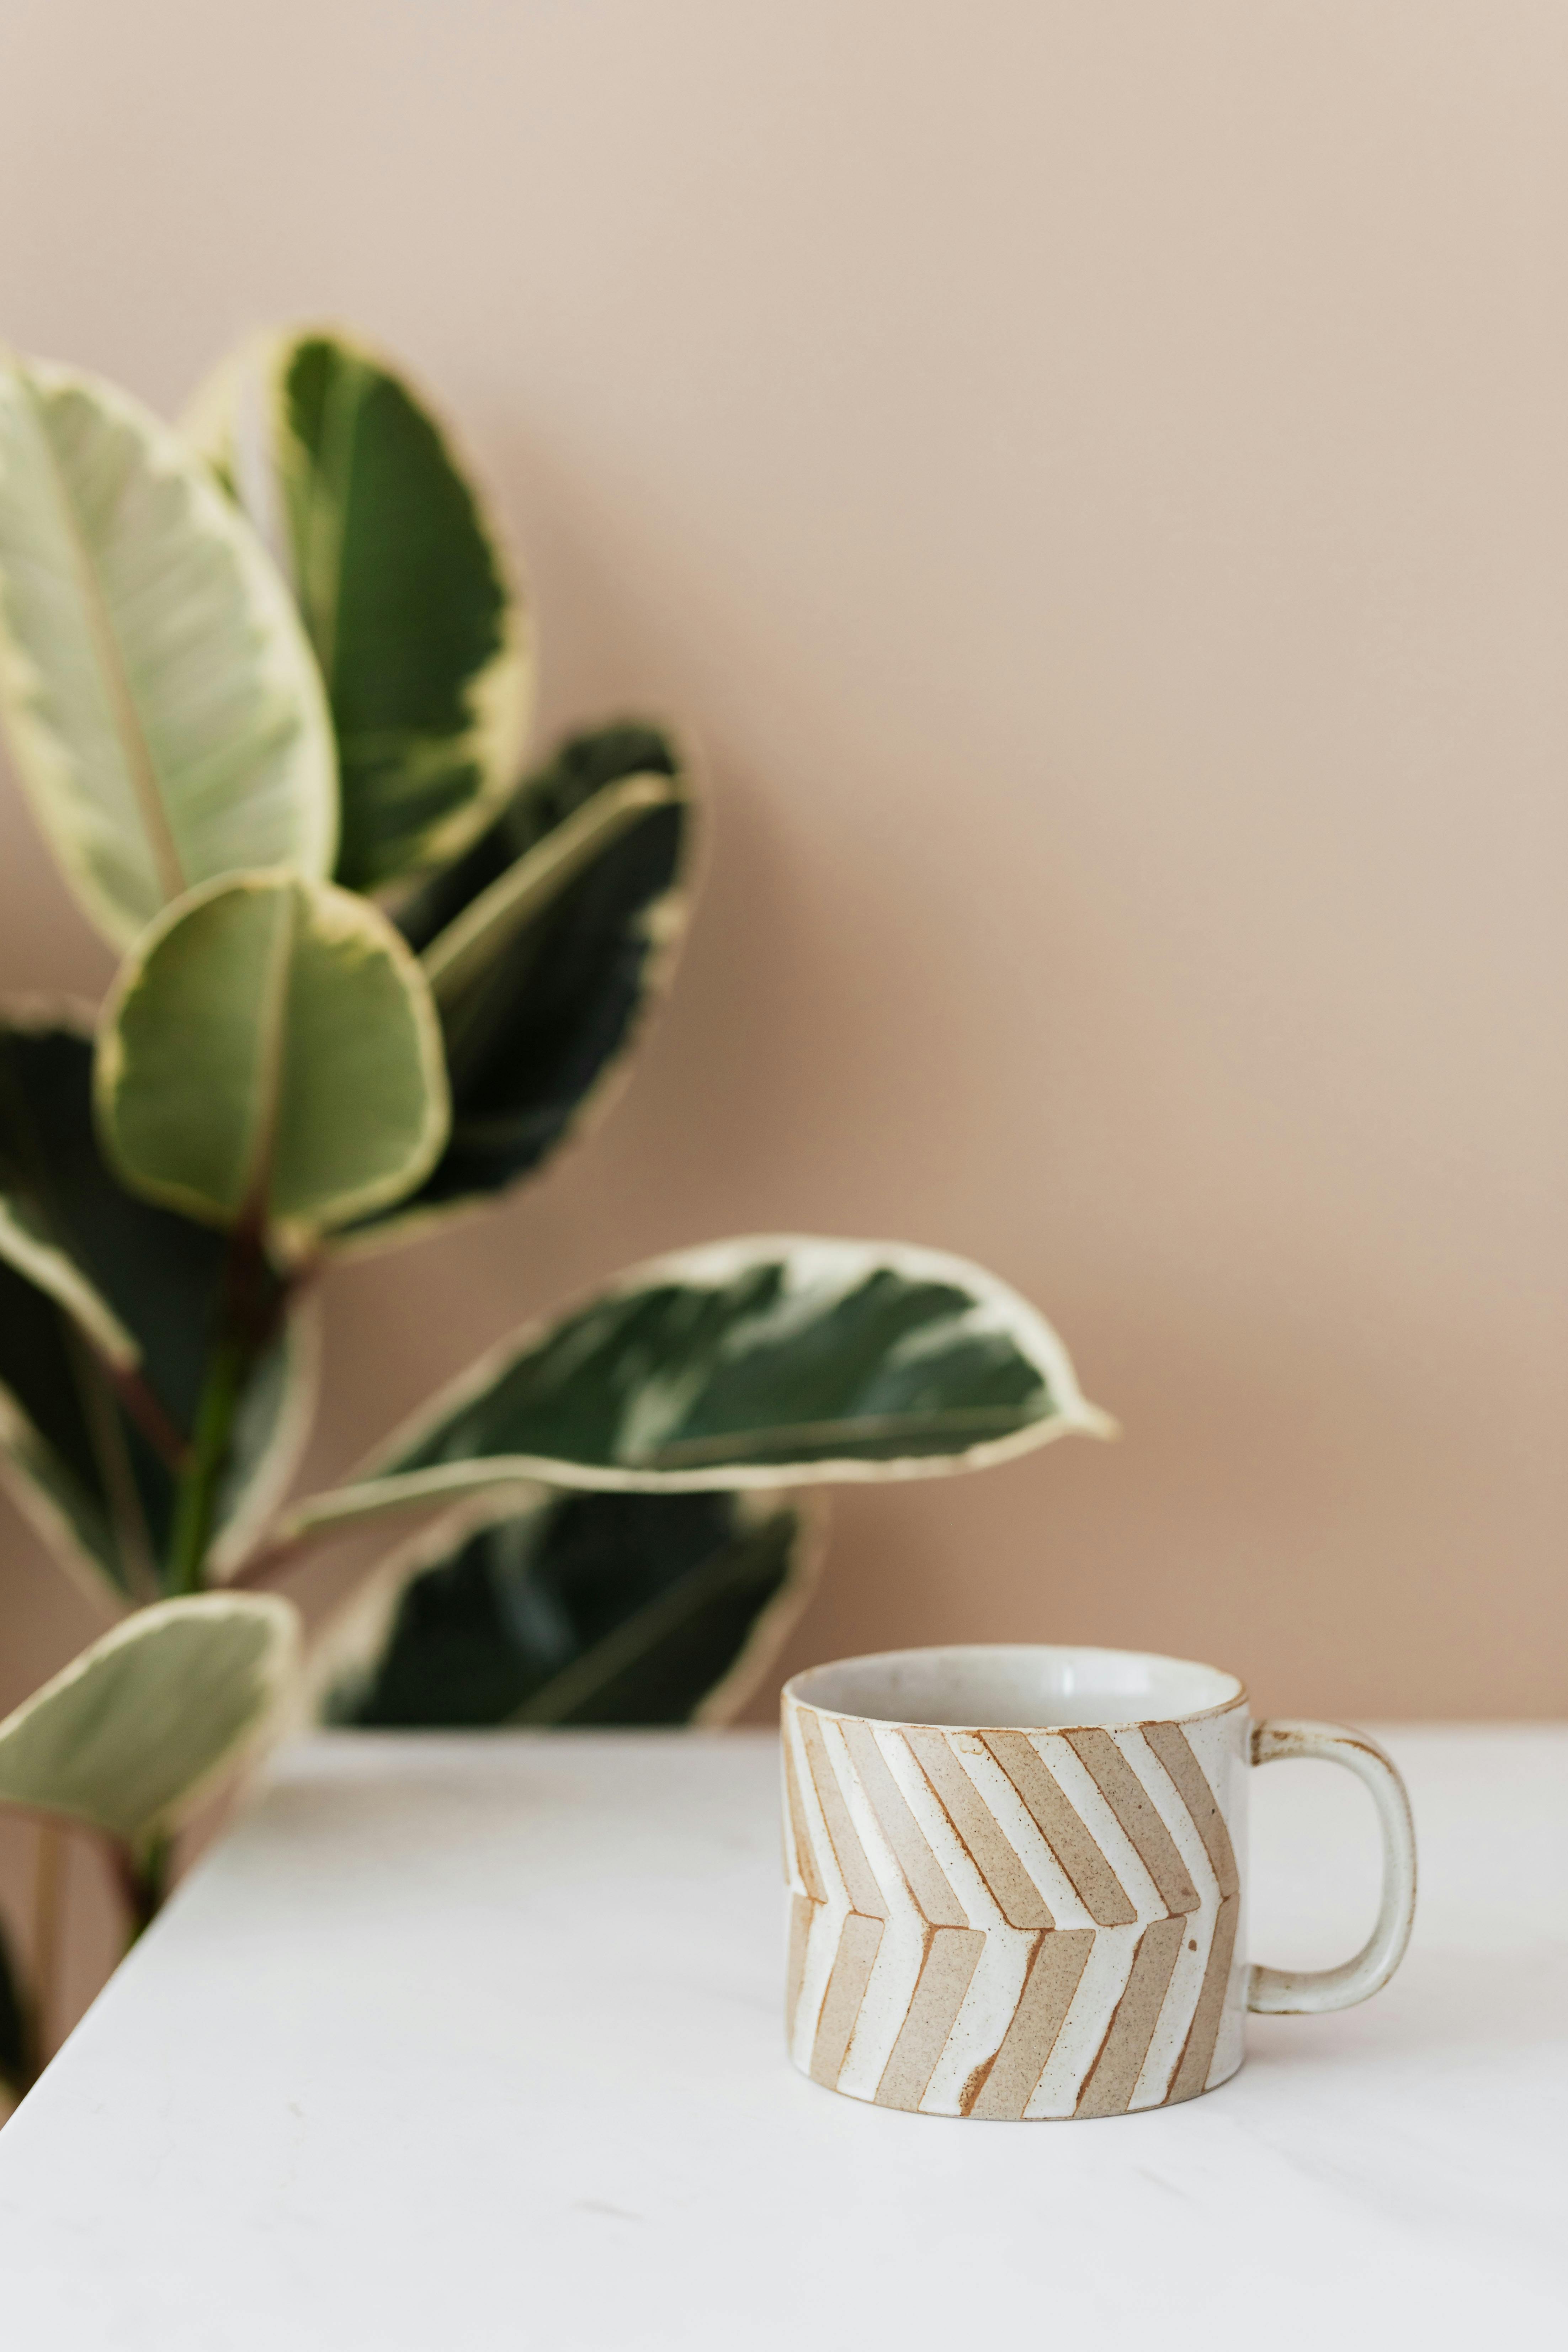 ceramic coffee cup on table next to ficus plant